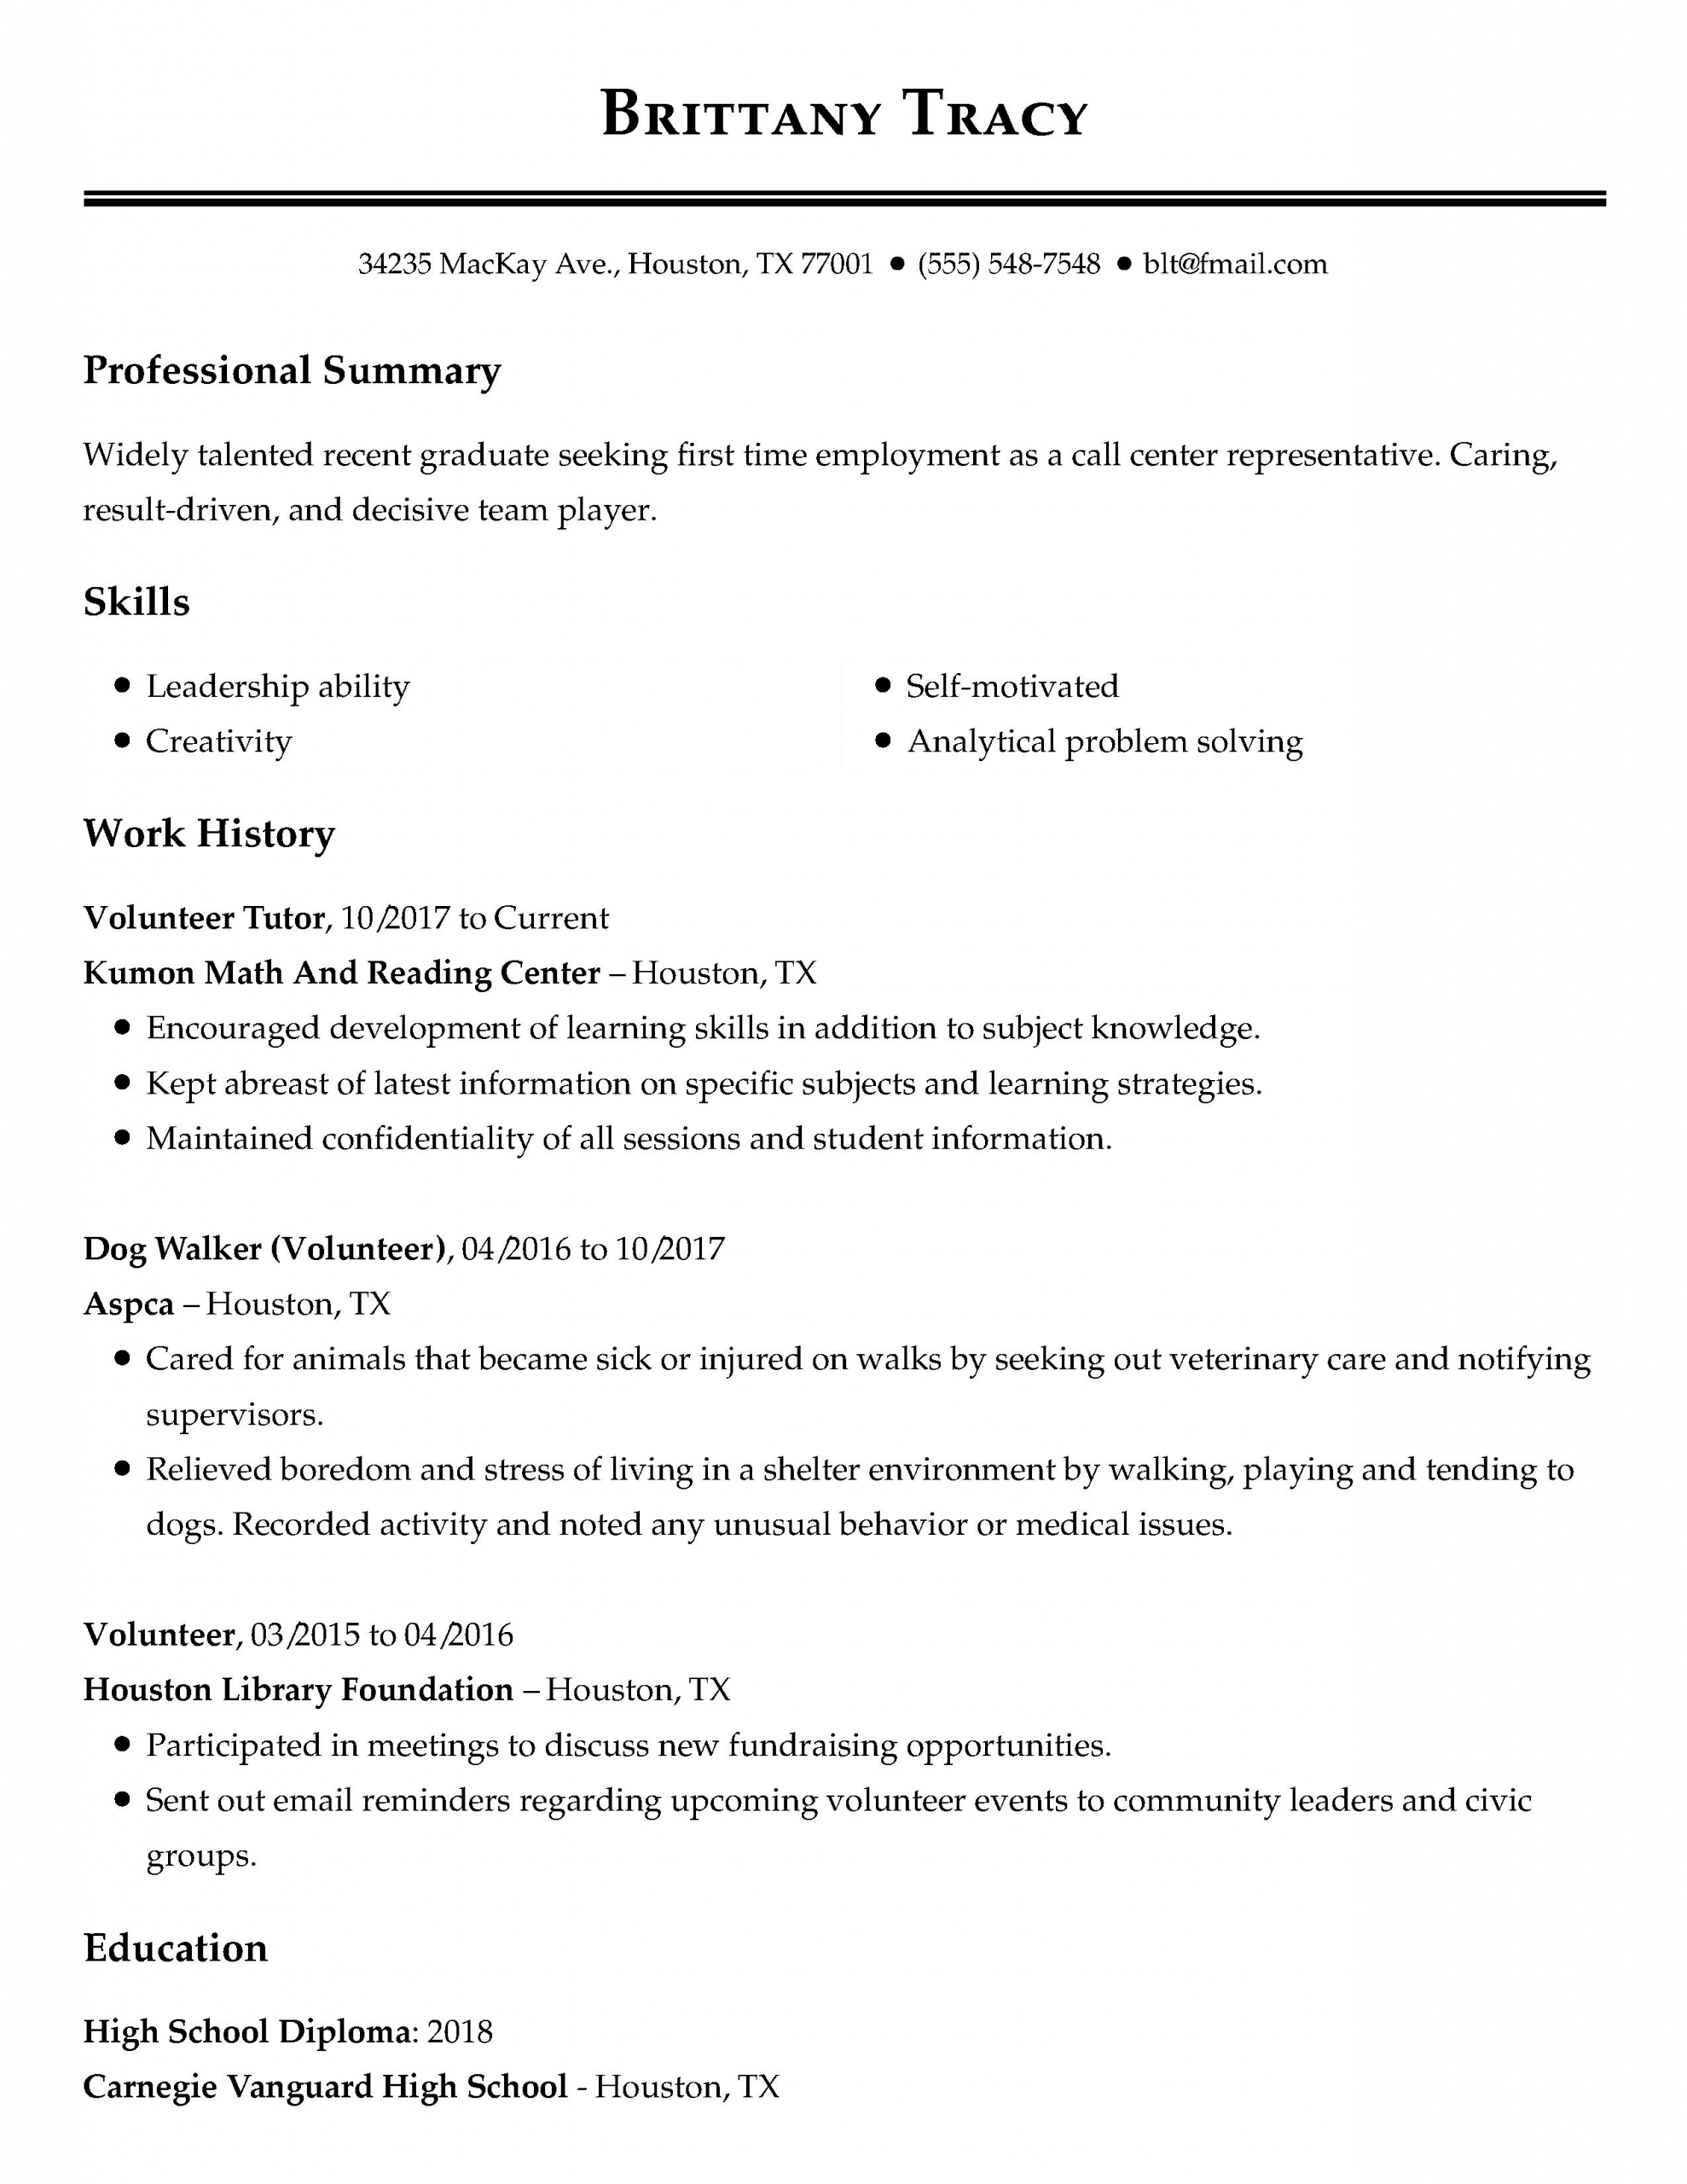 View 30 Samples Of Resumes Industry Experience Level with regard to dimensions 2550 X 3300